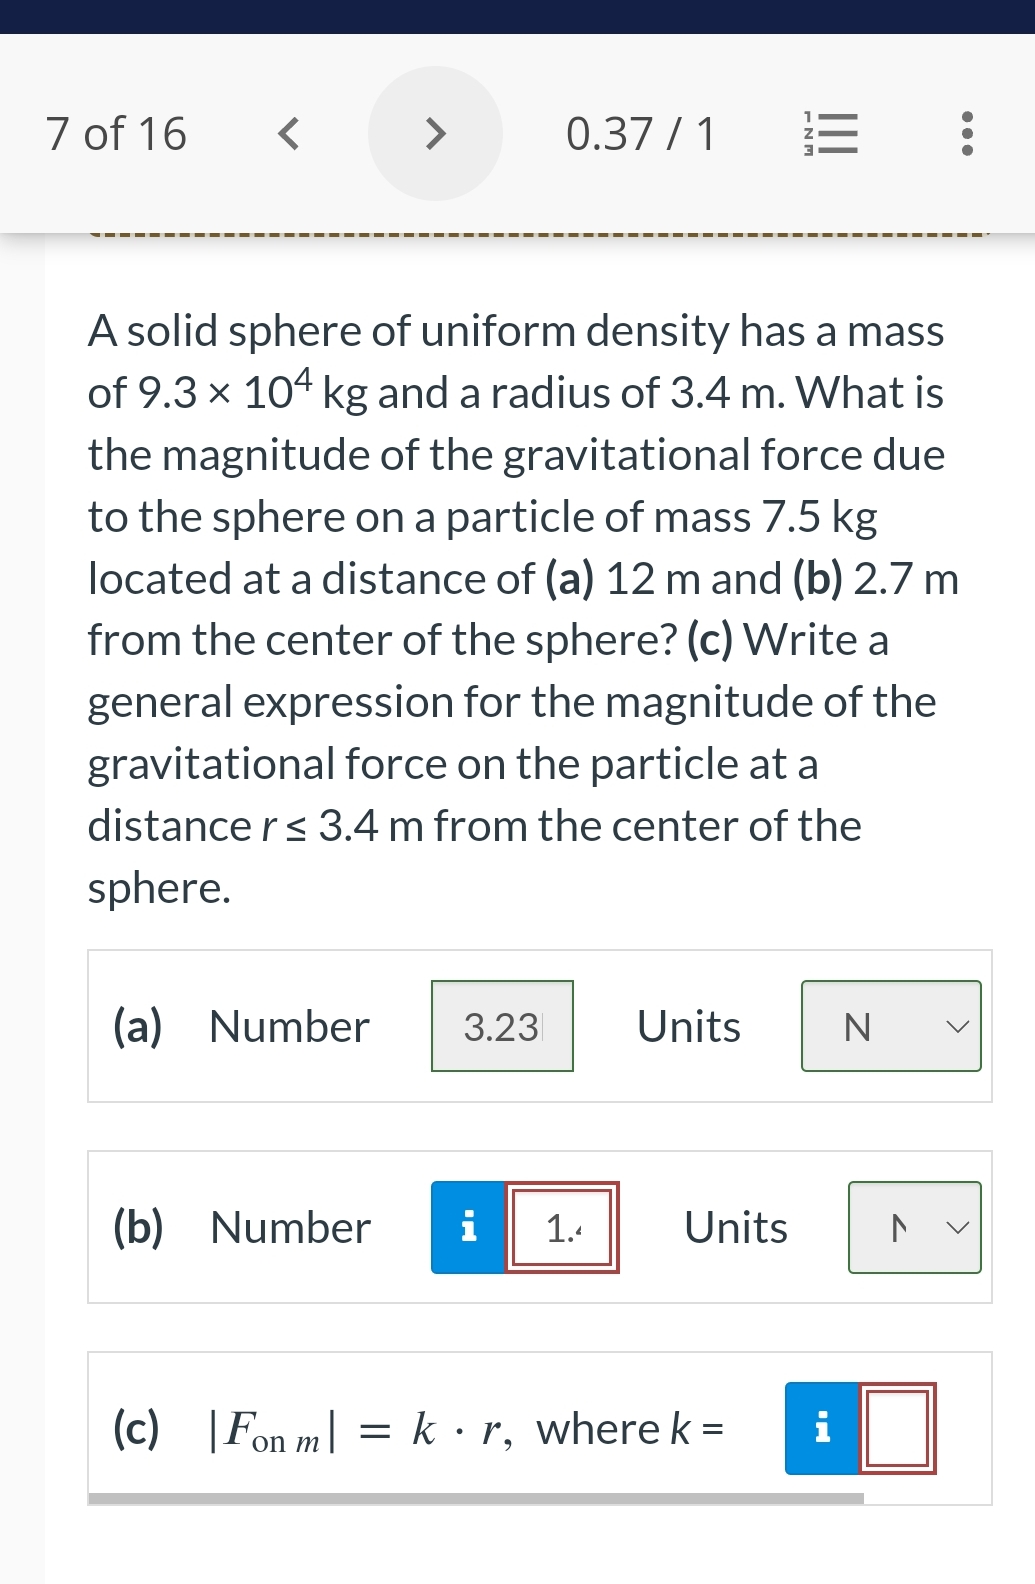 7 of 16
<
>
(a) Number
0.37/1
A solid sphere of uniform density has a mass
of 9.3 × 104 kg and a radius of 3.4 m. What is
the magnitude of the gravitational force due
to the sphere on a particle of mass 7.5 kg
located at a distance of (a) 12 m and (b) 2.7 m
from the center of the sphere? (c) Write a
general expression for the magnitude of the
gravitational force on the particle at a
distance r ≤ 3.4 m from the center of the
sphere.
3.23
(b) Number i 1.4
Units
Units
E
(c) |Fon m = k·r, where k =
i
N
N
>
<